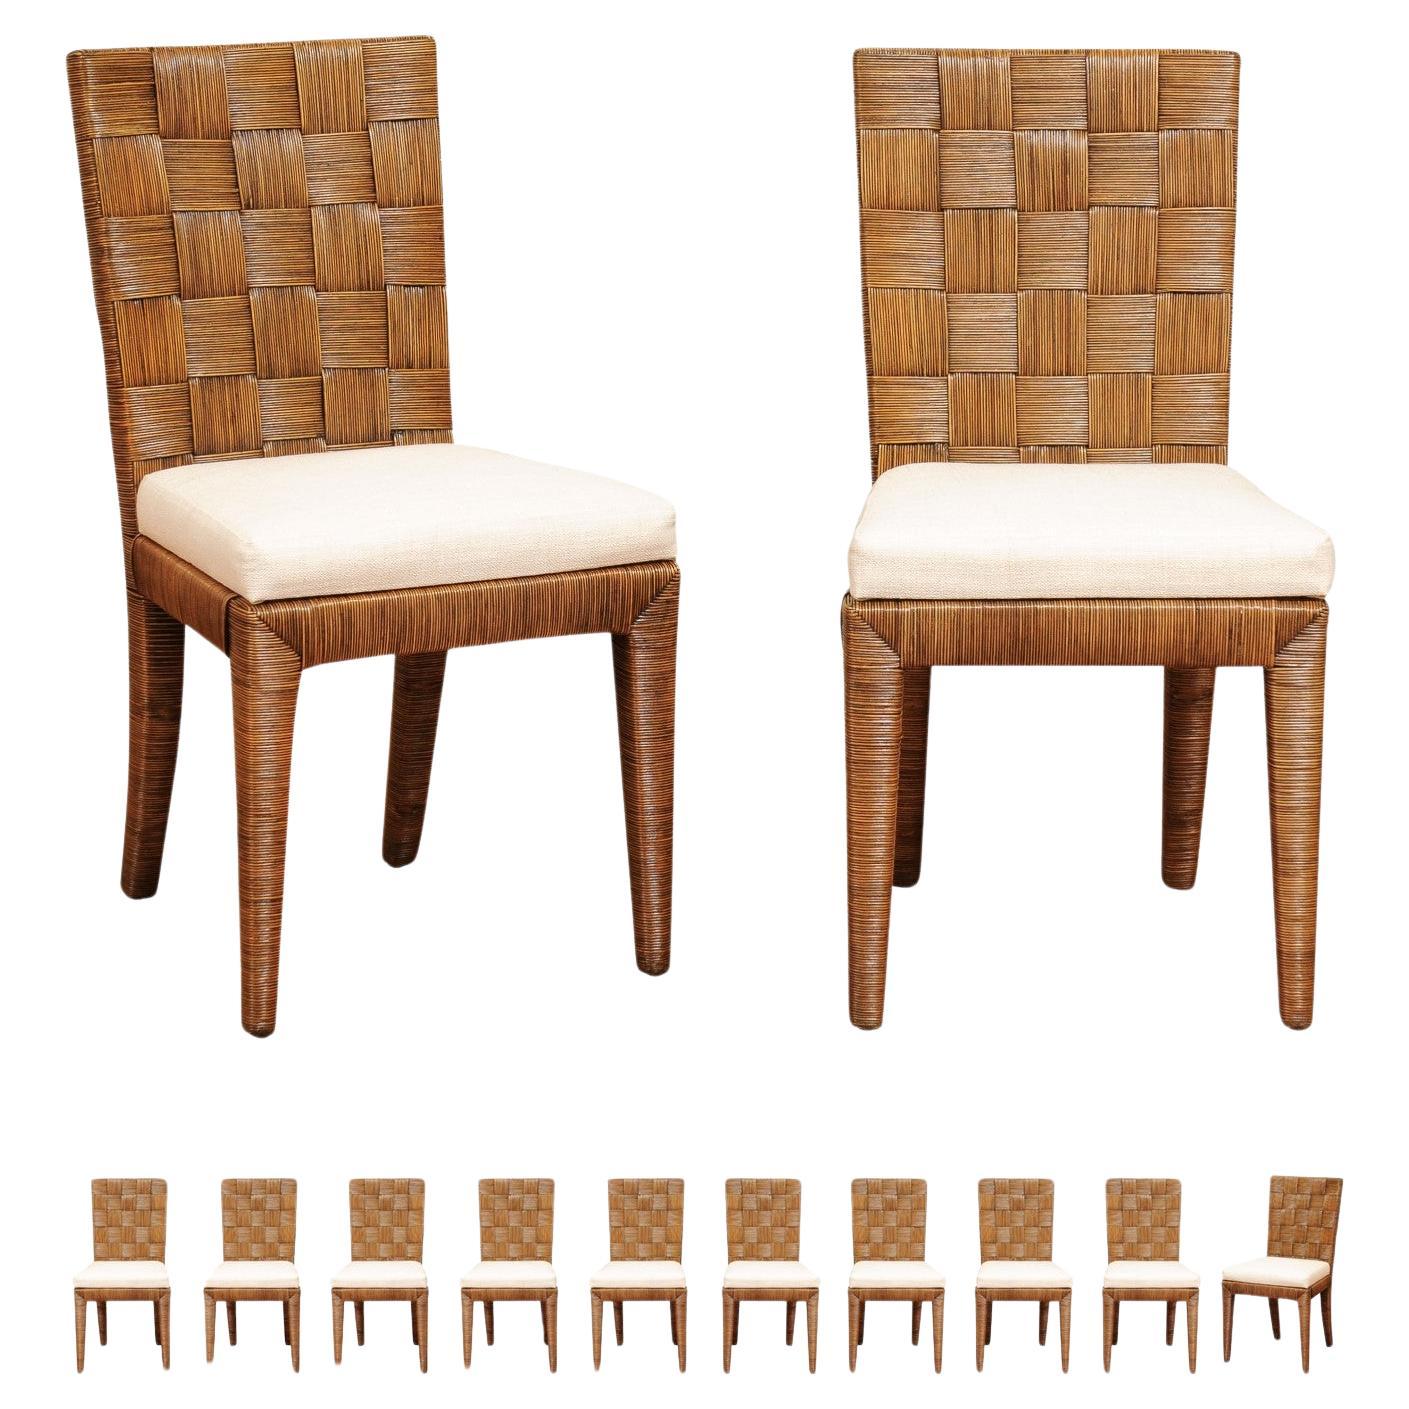 Incredible Set of 12 Vintage Tobacco Cane Chairs by John Hutton for Donghia